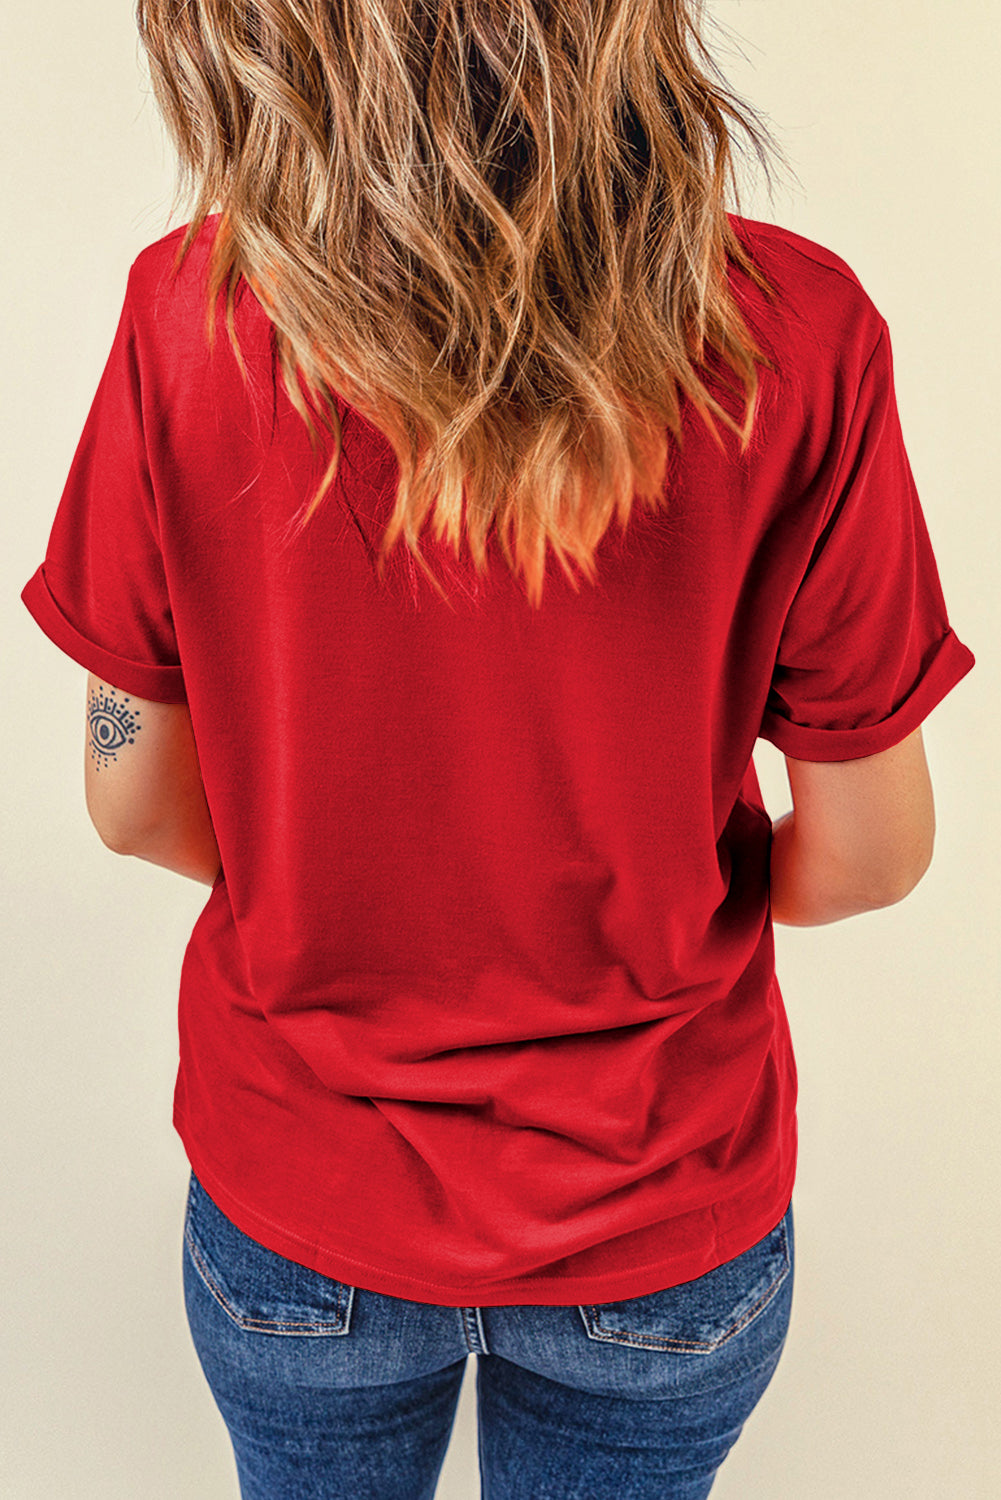 Rose Red Casual Plain Crew Neck Tee